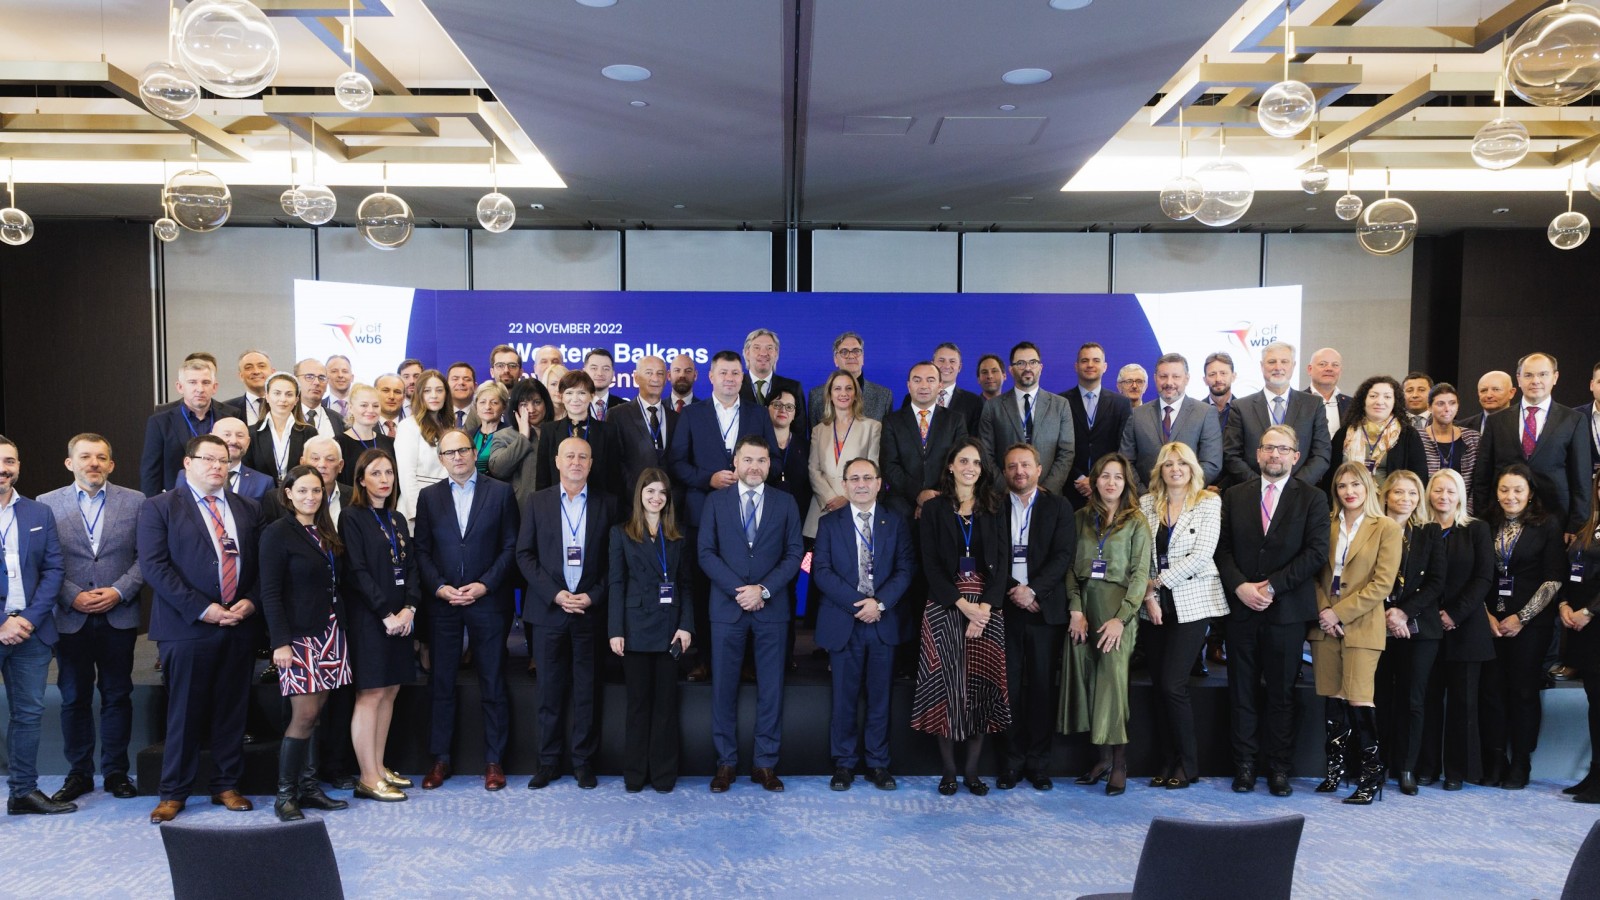 Western Balkans Investment Conference participants family photo (Photo: Matej Colakovic, RCC)